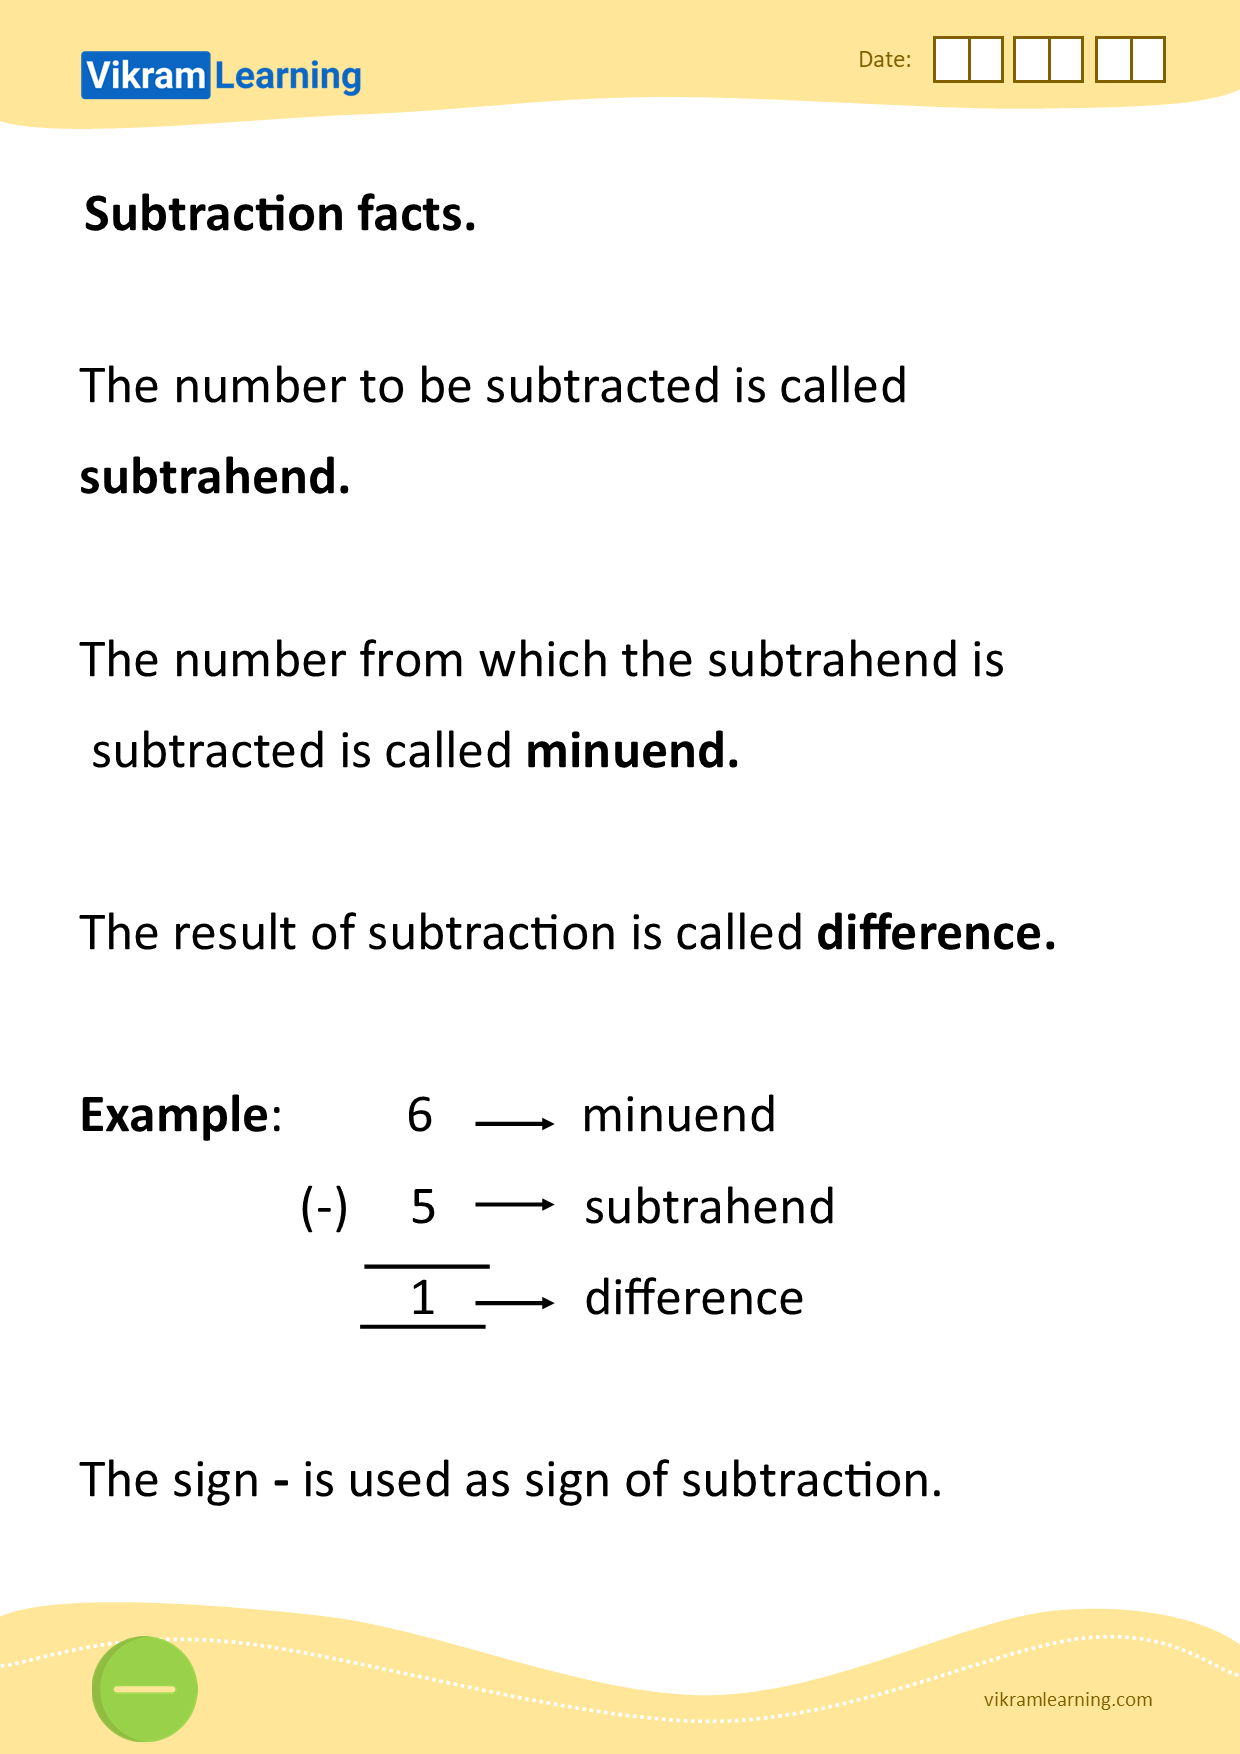 Download subtraction facts worksheets